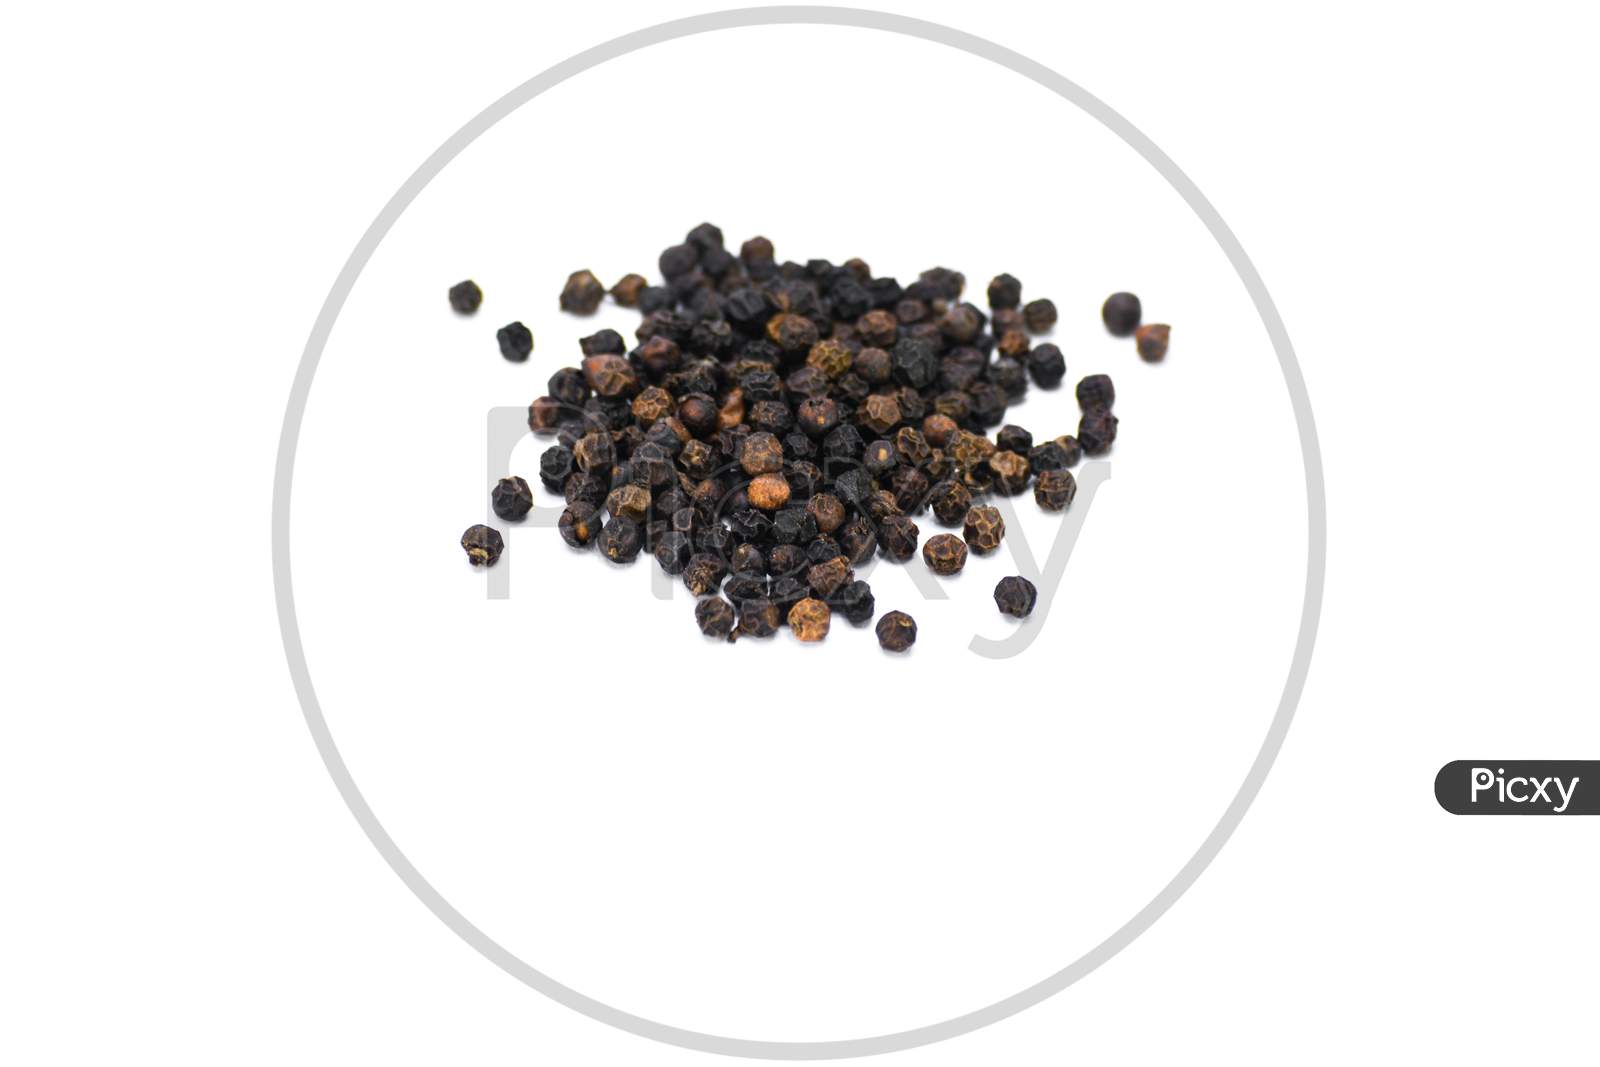 Black peppercorns isolated on white background